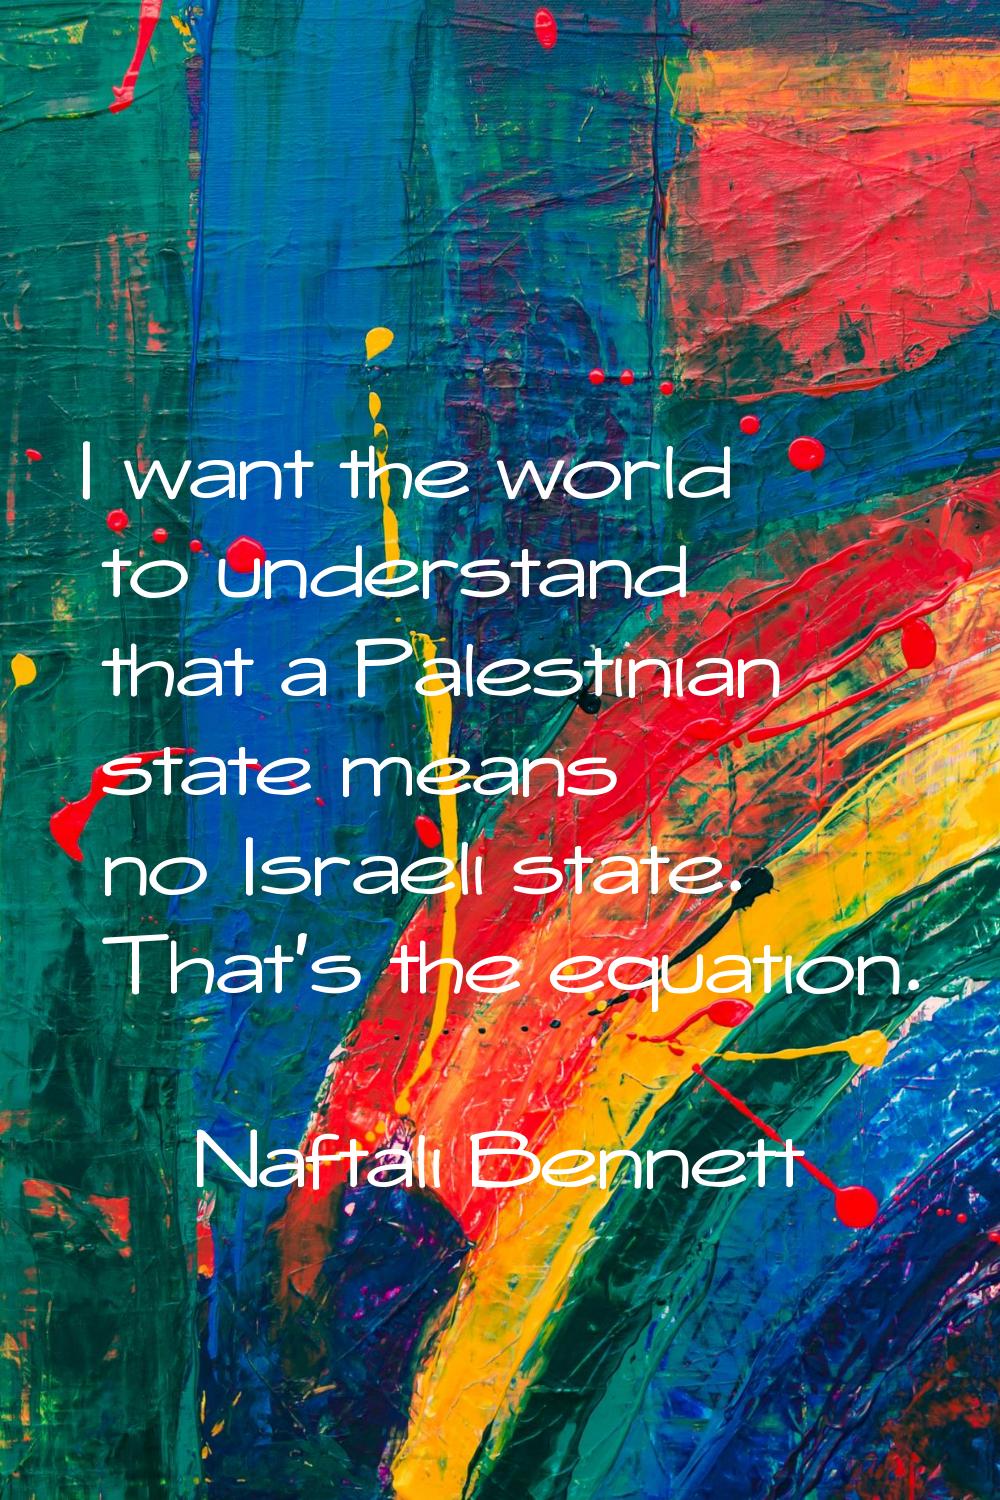 I want the world to understand that a Palestinian state means no Israeli state. That's the equation